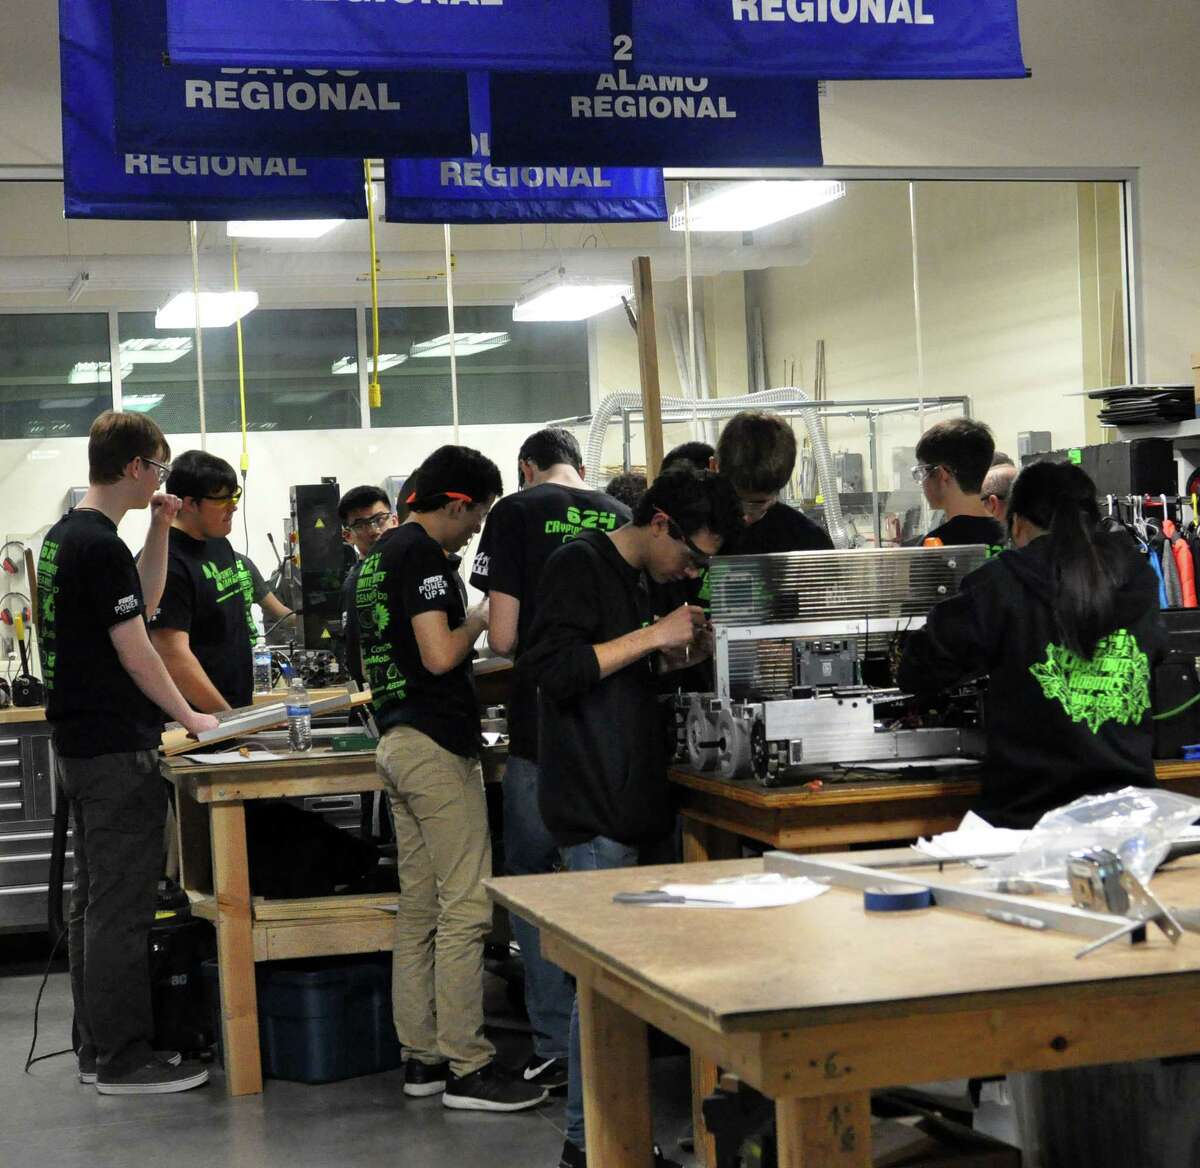 Students fromÂ Cinco Ranch High School Robotics Team 624 work on their machine for the 2018 international FIRST competition at a special facility for Science, Technology, Engineering and Math education built by theÂ Katy Independent School District. The national championship will be held at the George R. Brown Convention Center from April 18-21.